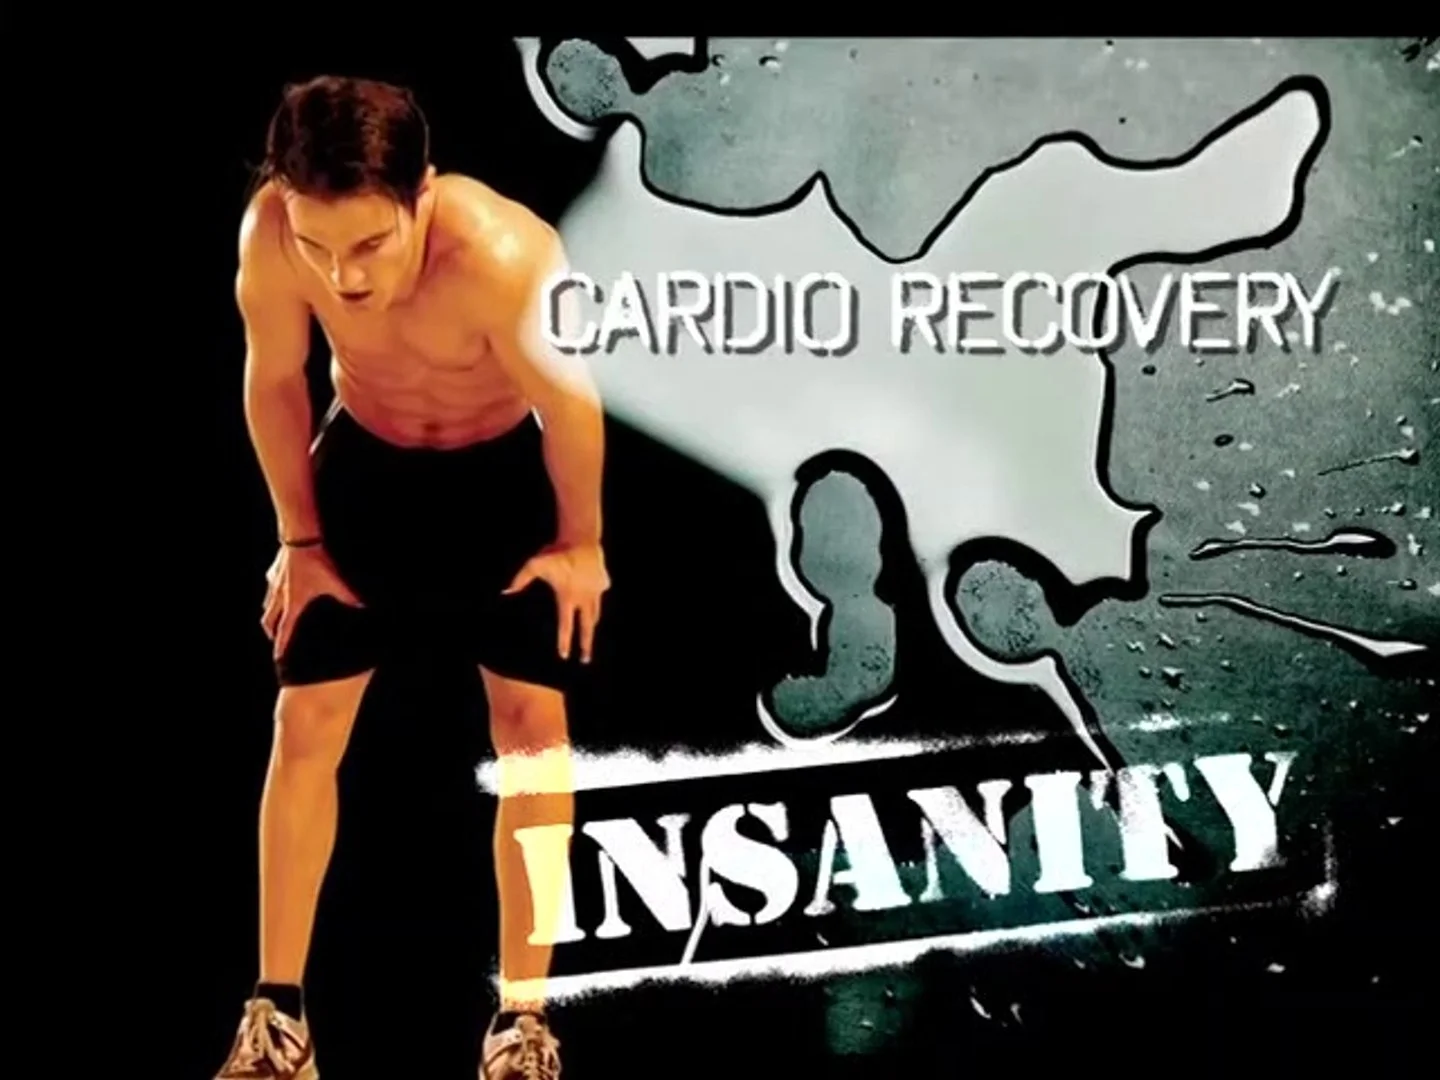 How long is cardio recovery insanity?